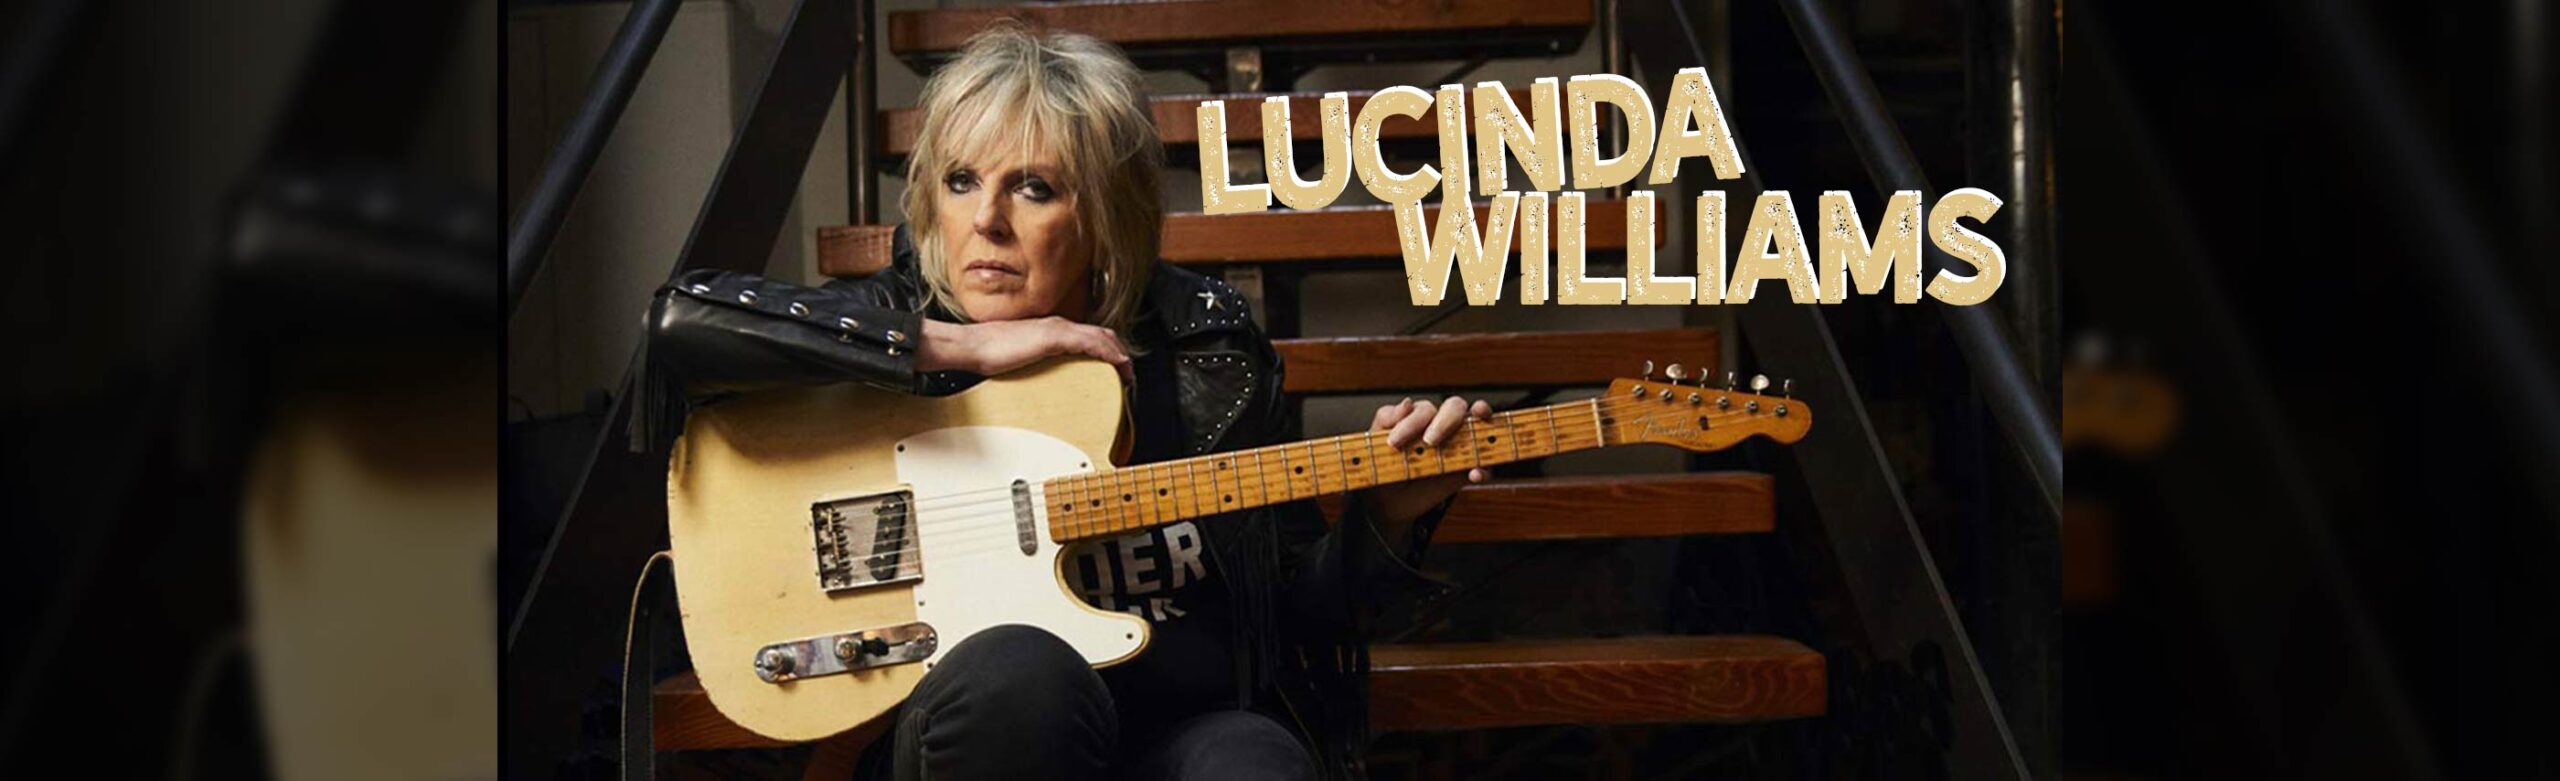 EVENT INFO: Lucinda Williams at The ELM Image